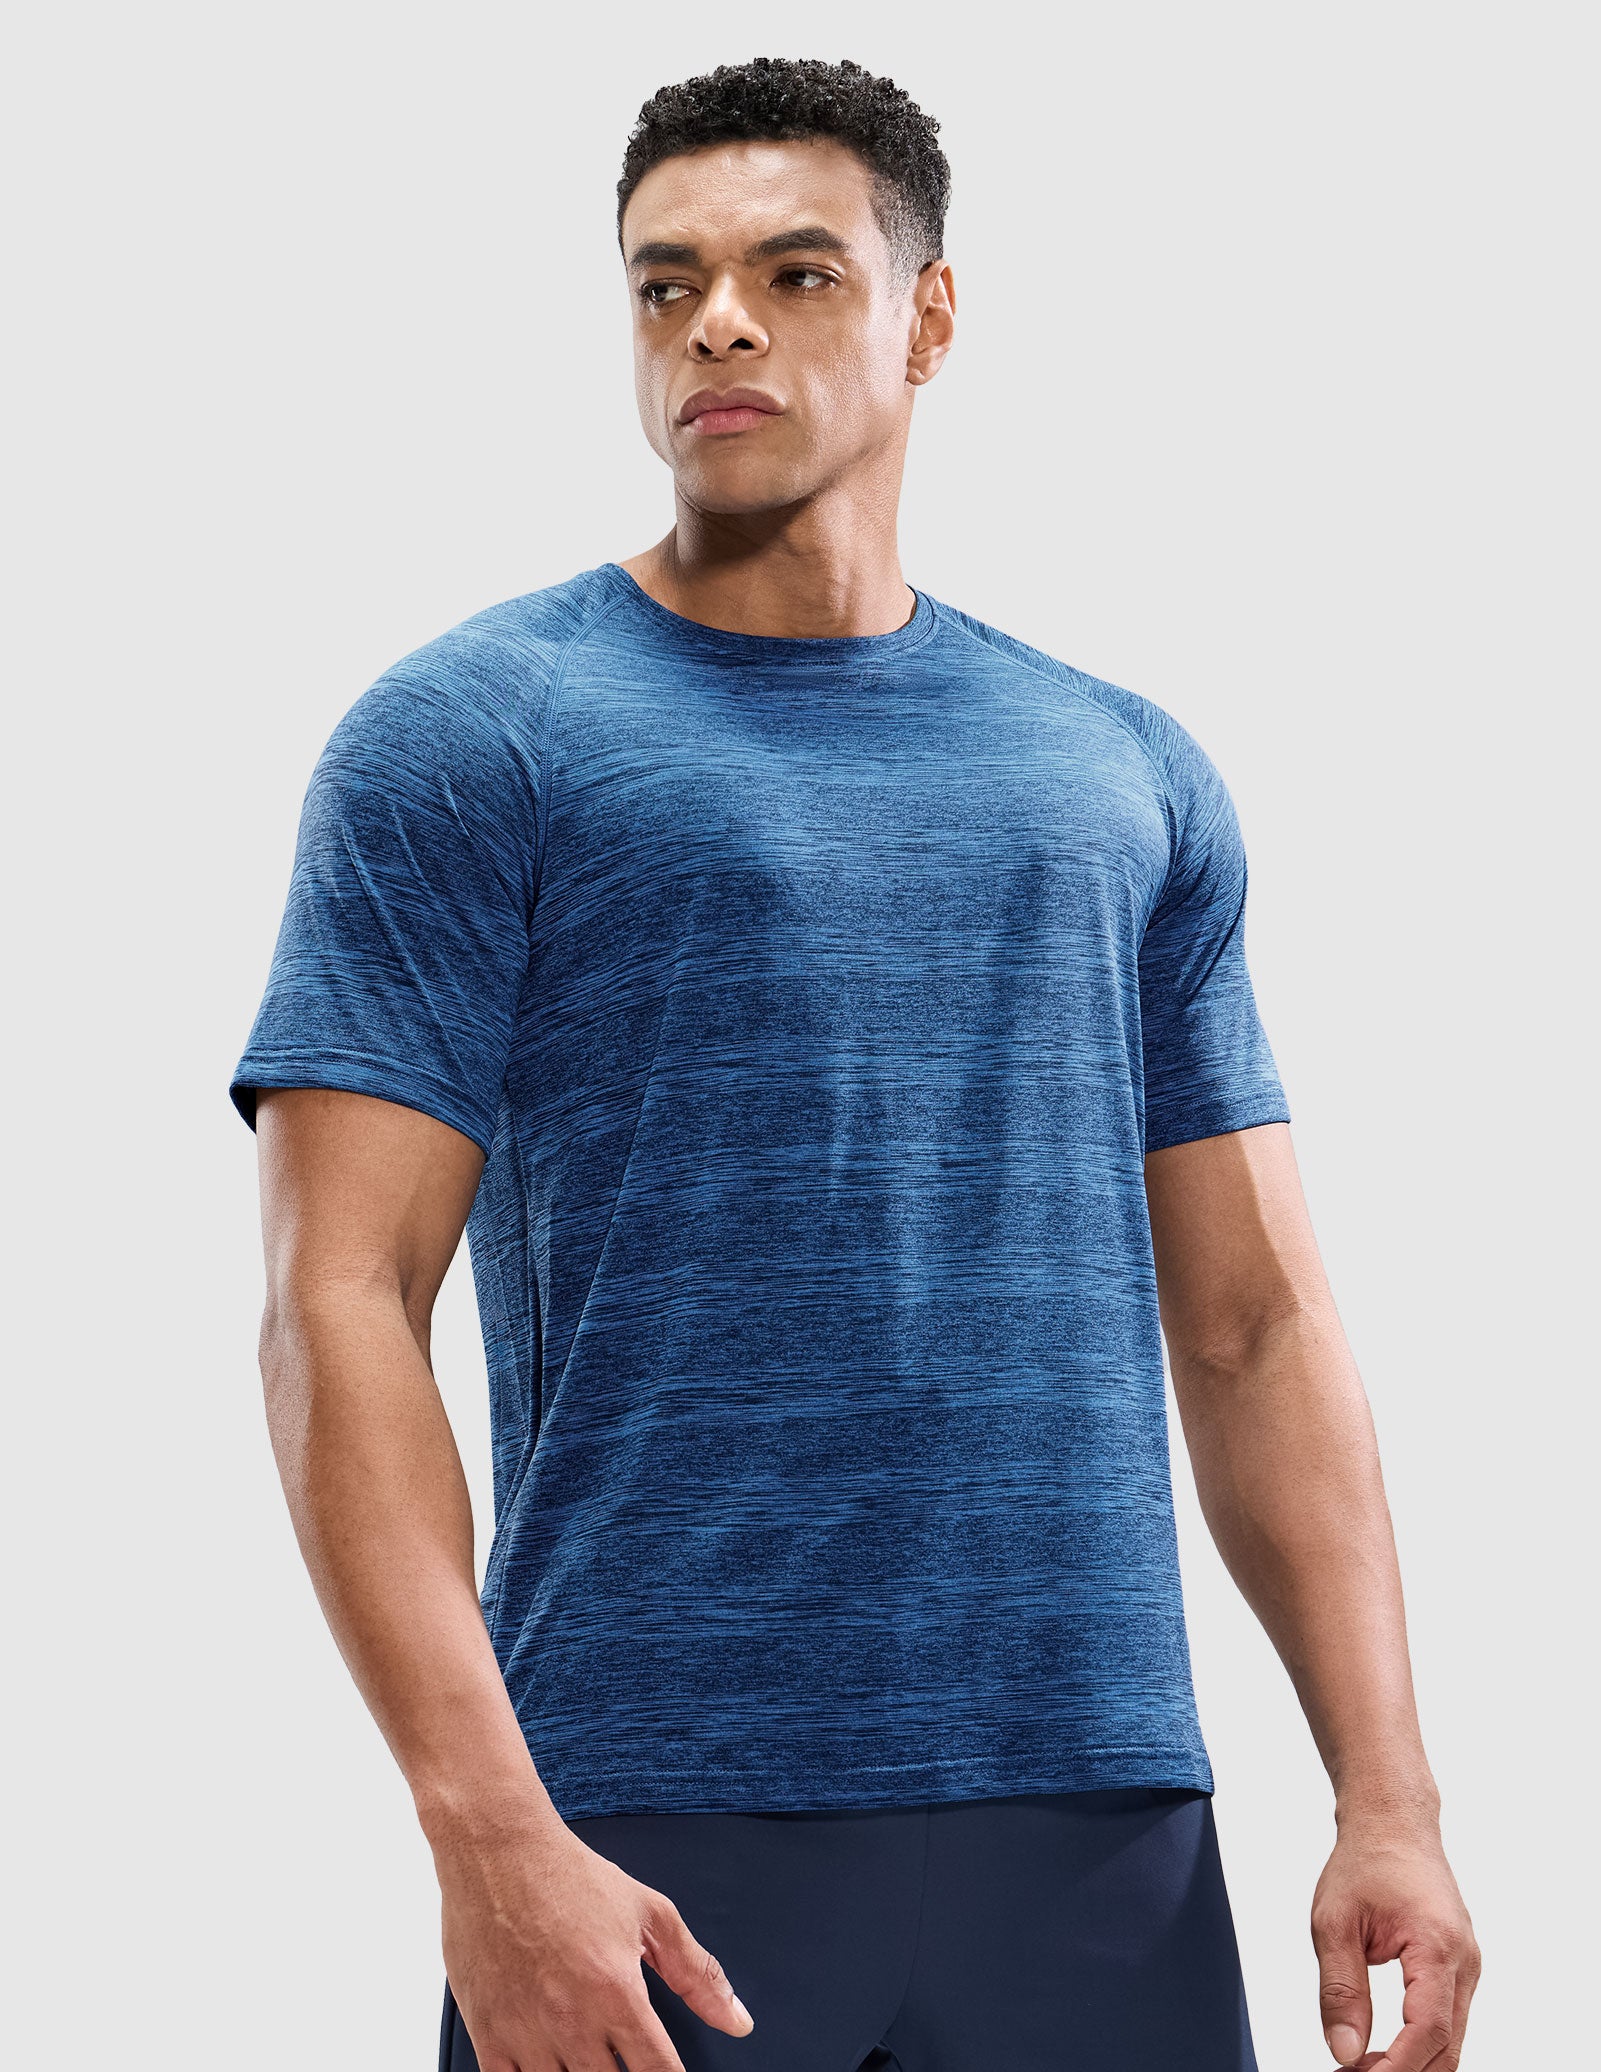 Men's Dry Fit Workout T-Shirts Athletic Running Tee